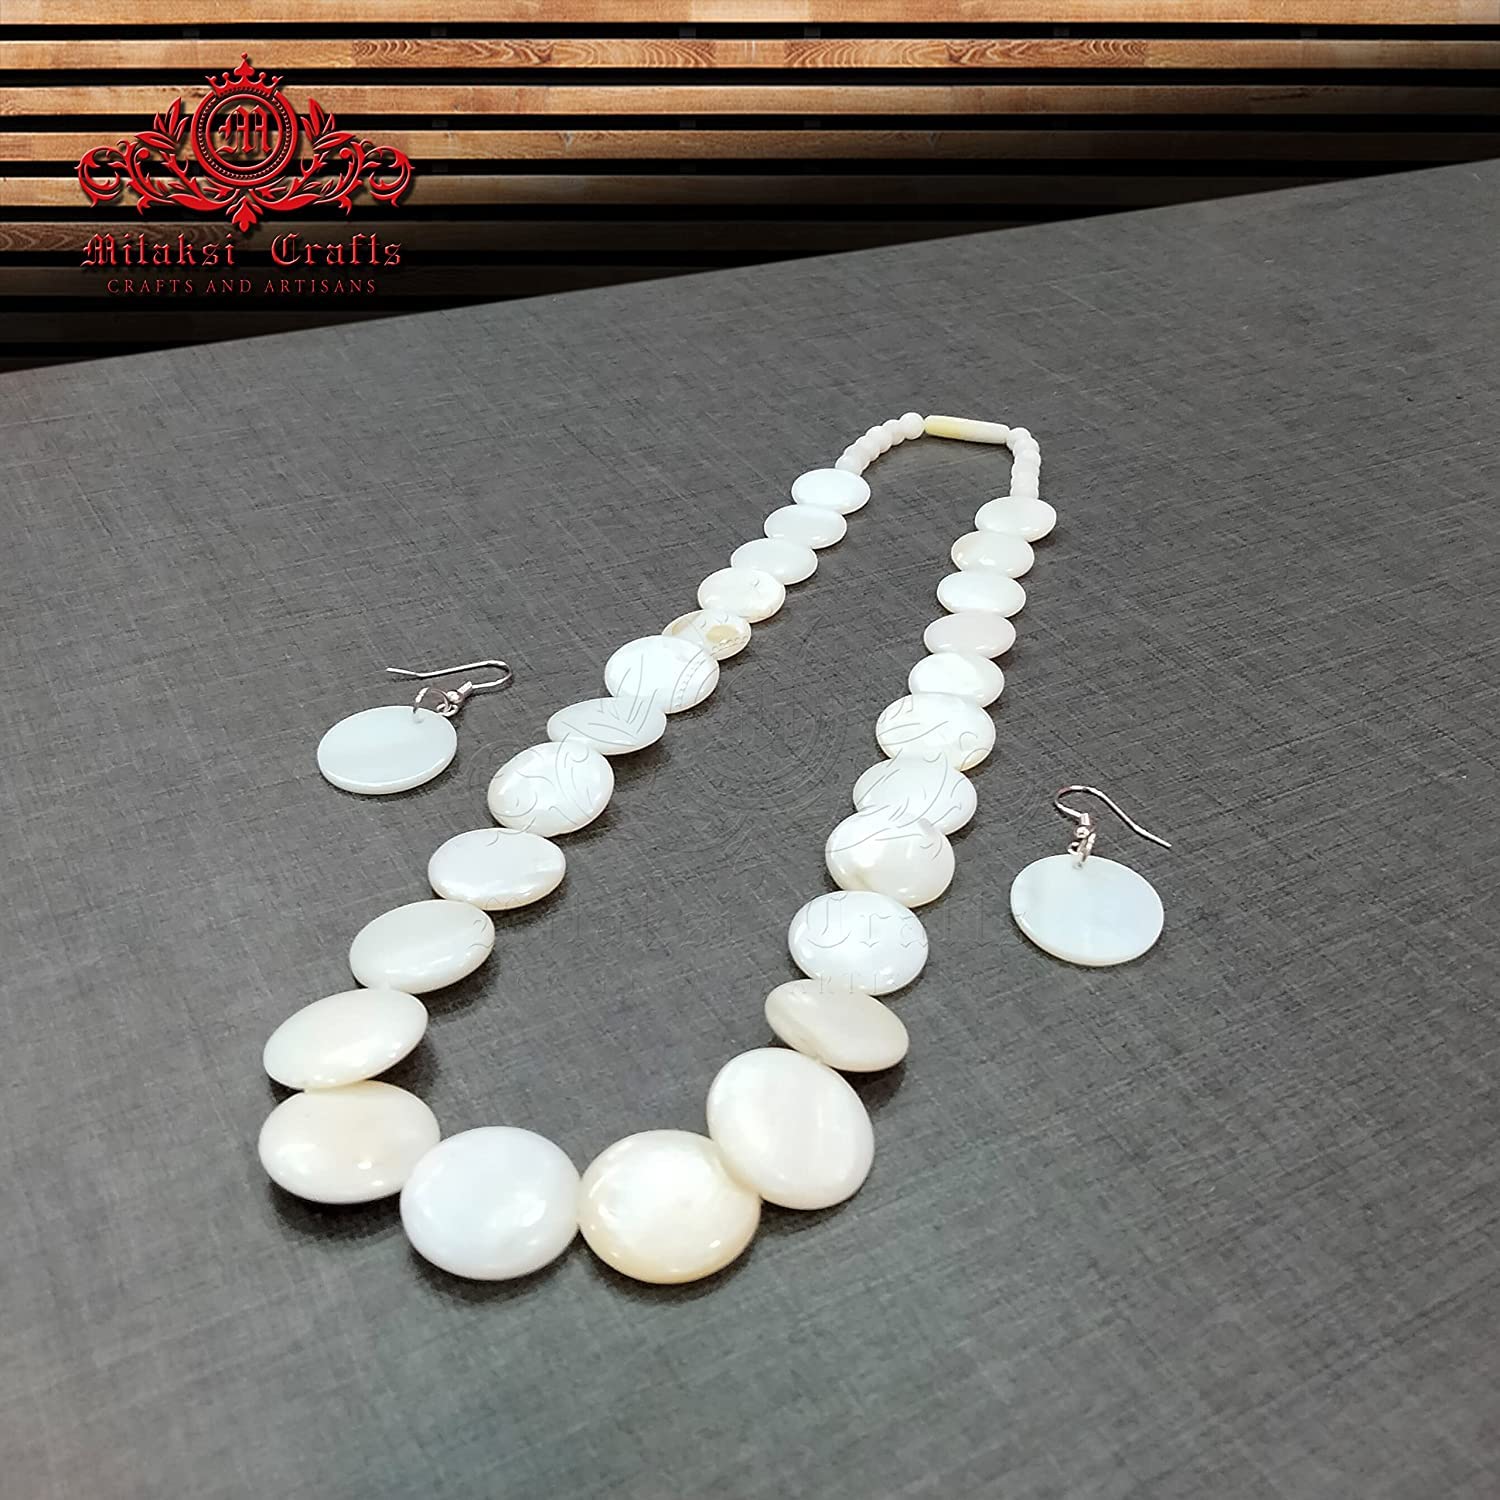 Seashell Mother of Pearls Neclace with Earring